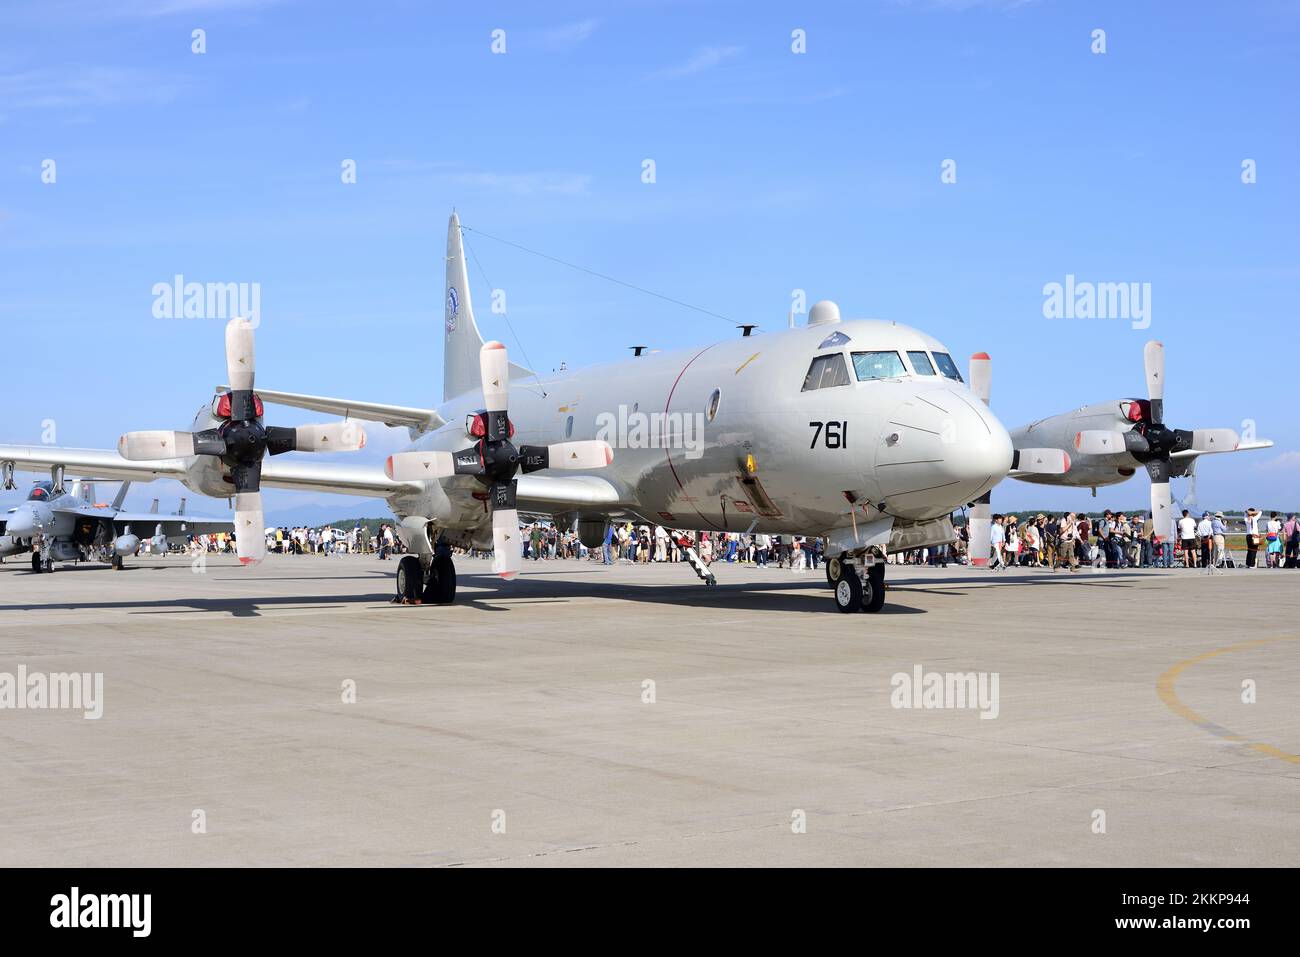 Aomori Prefecture, Japan - September 07, 2014: United States Navy Lockheed Martin P-3C Orion maritime patrol aircraft from VP-40 Fighting Marlins. Stock Photo